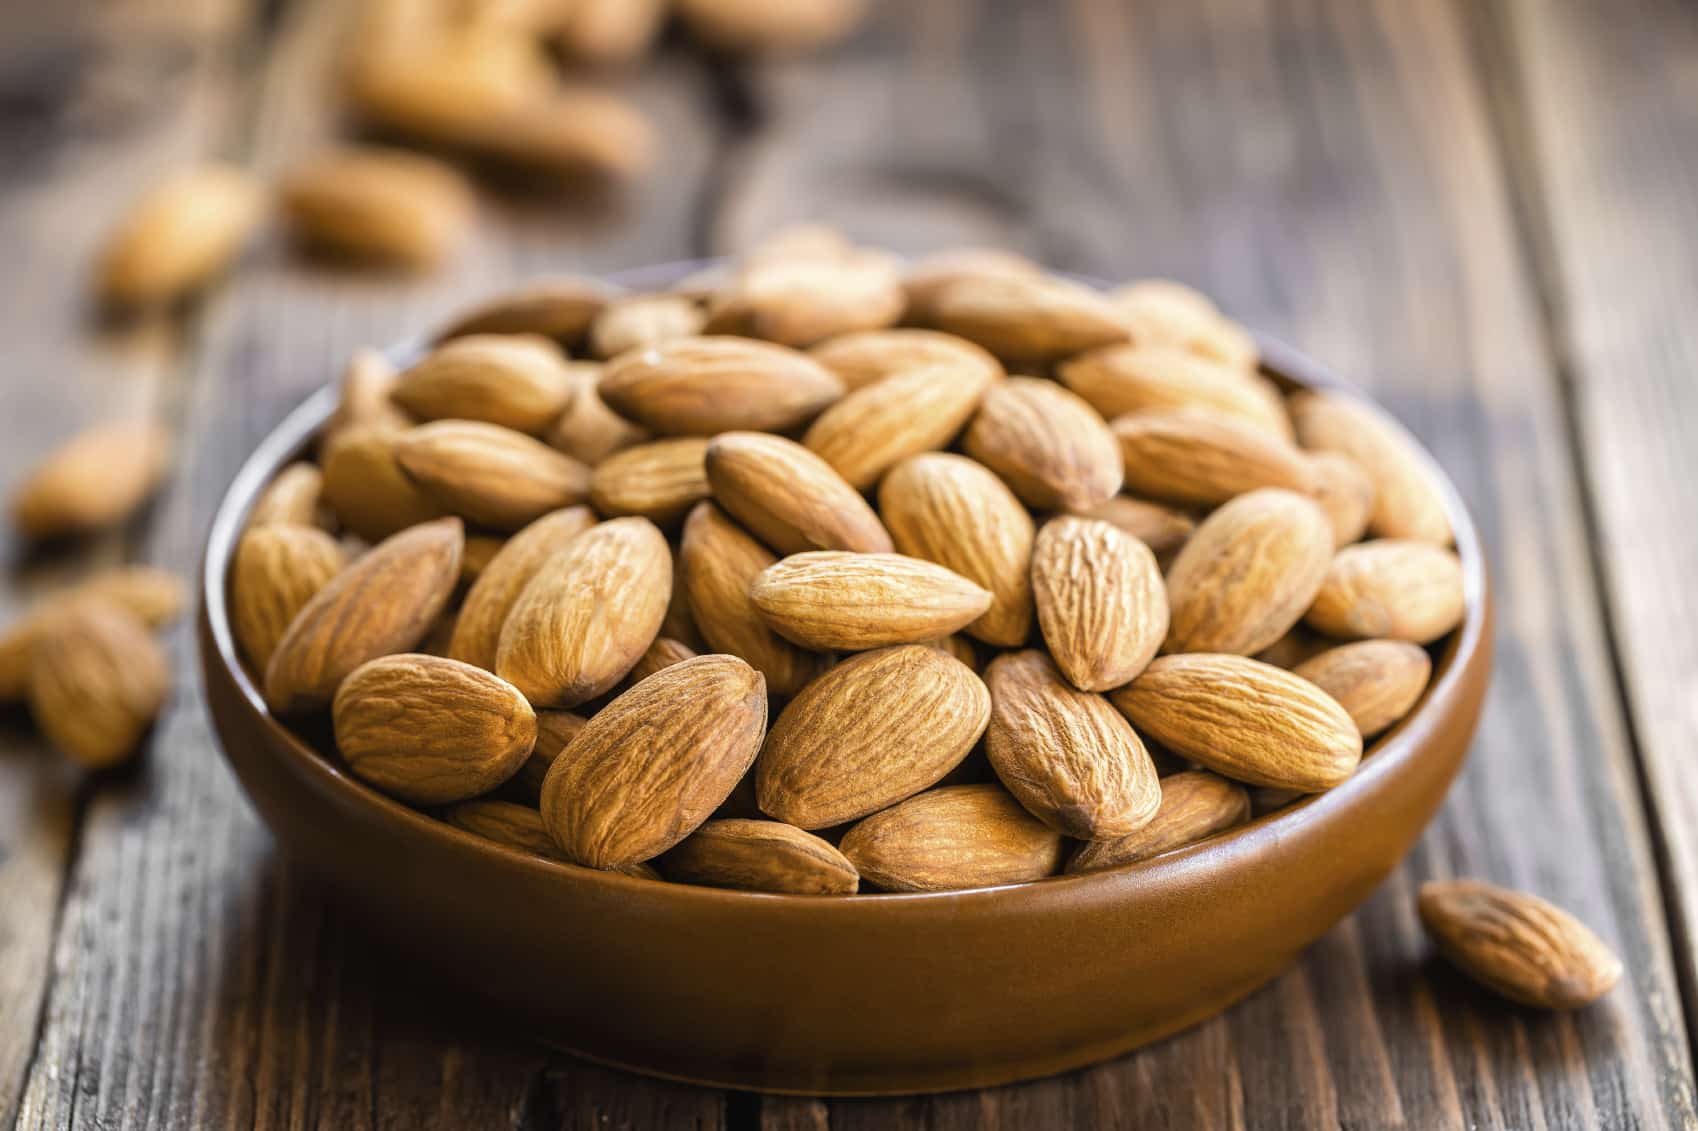 Almonds are full of Zinc, which keeps your body balanced as well as your mood.